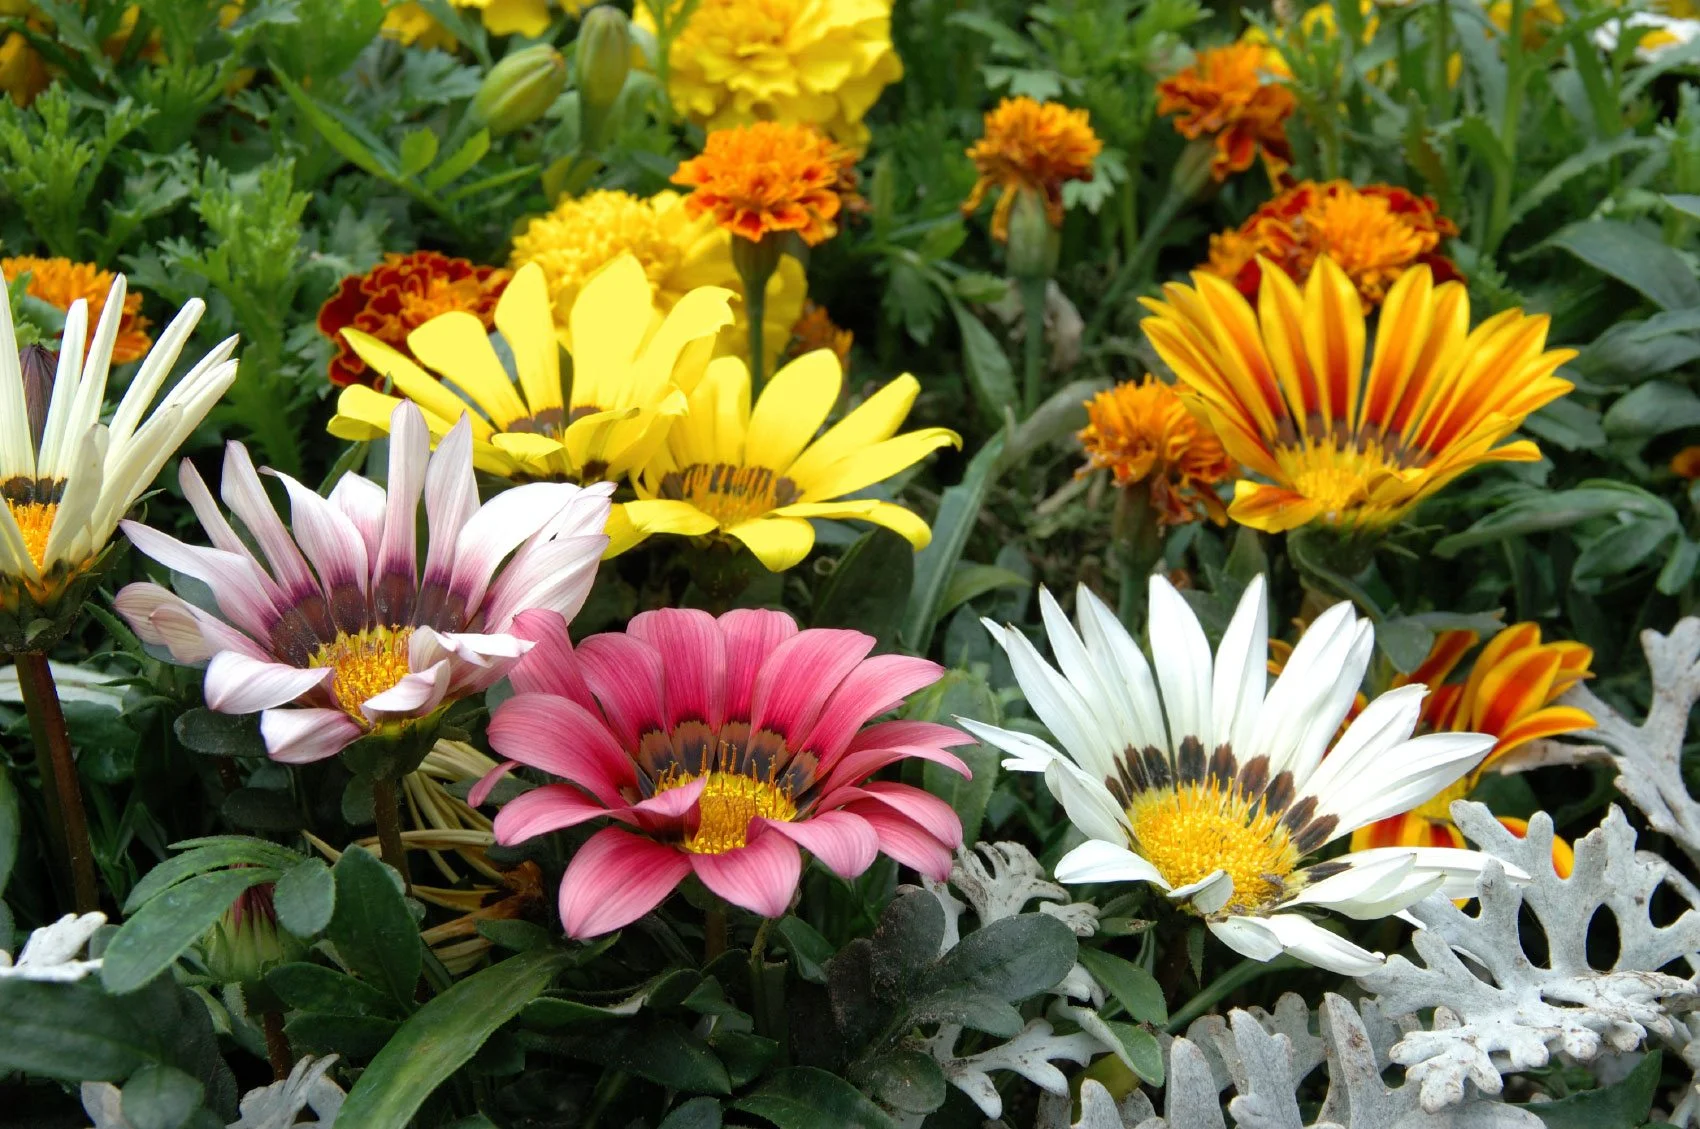 Gazania Care 101: How to Keep Your Garden Blooming